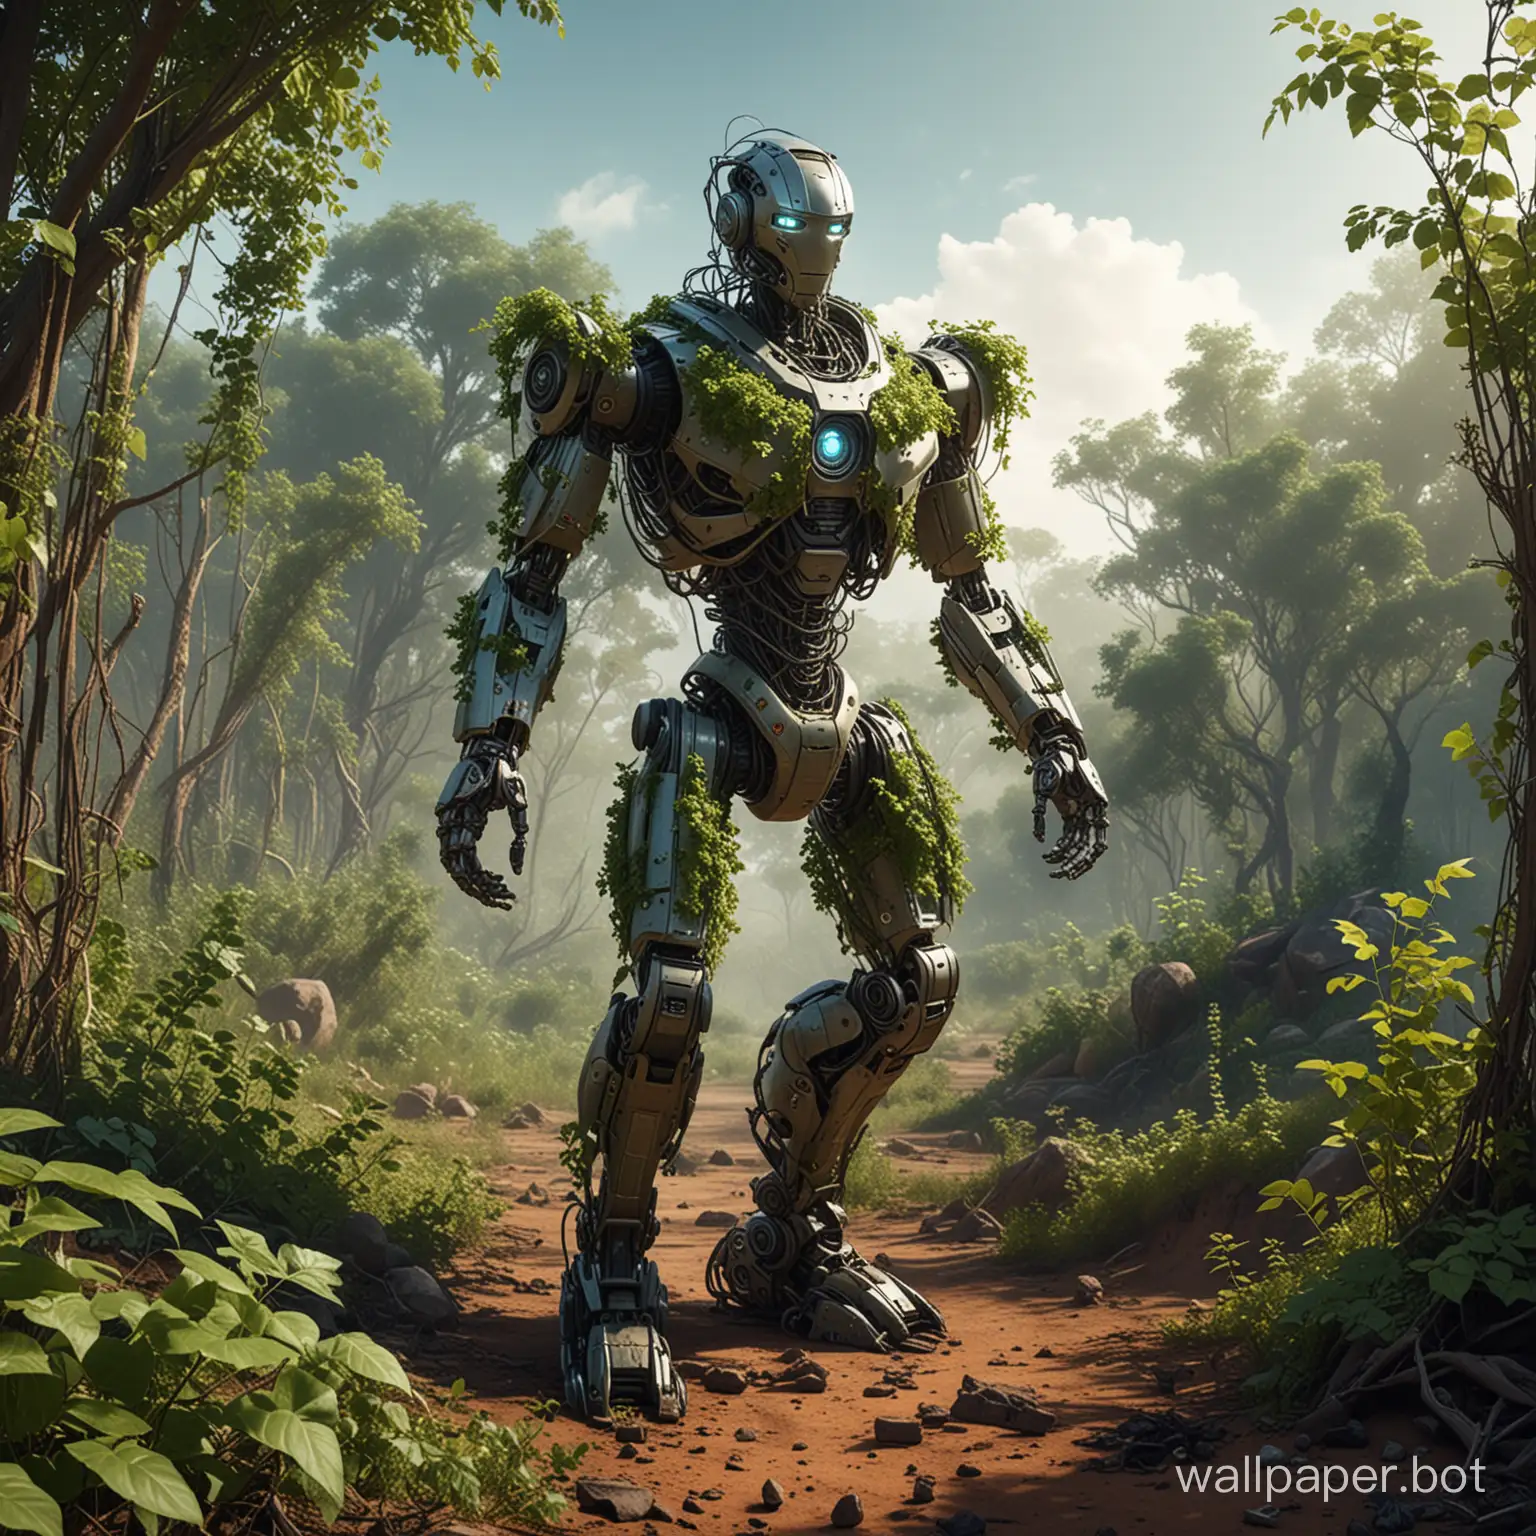 Robot-Overgrown-by-Vines-on-NatureDominated-Planet